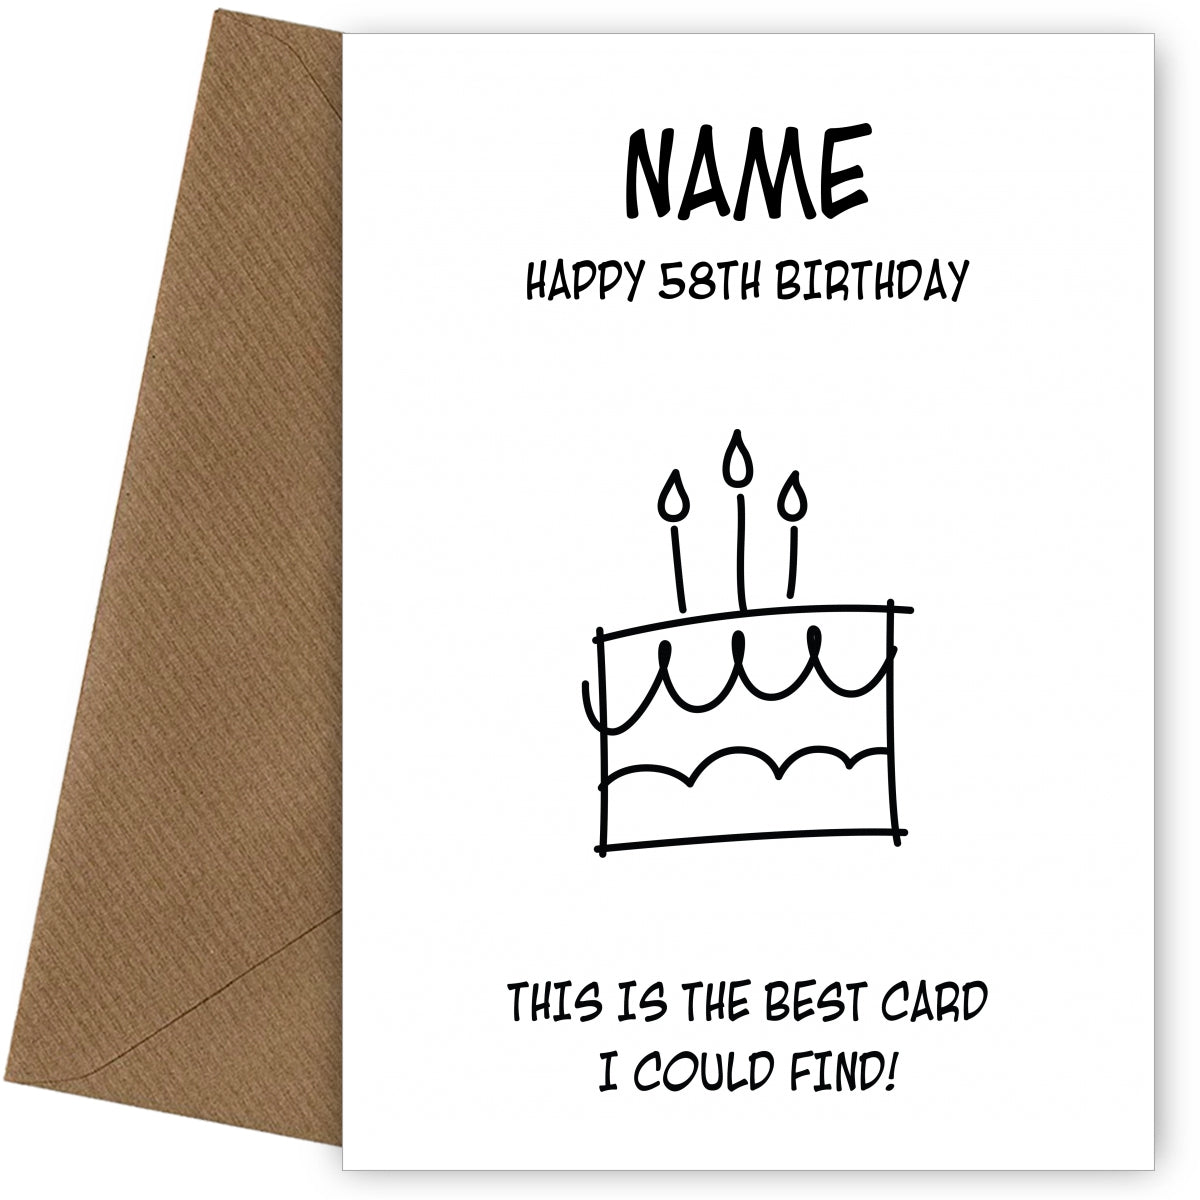 Happy 58th Birthday Card - Best Card I Could Find!